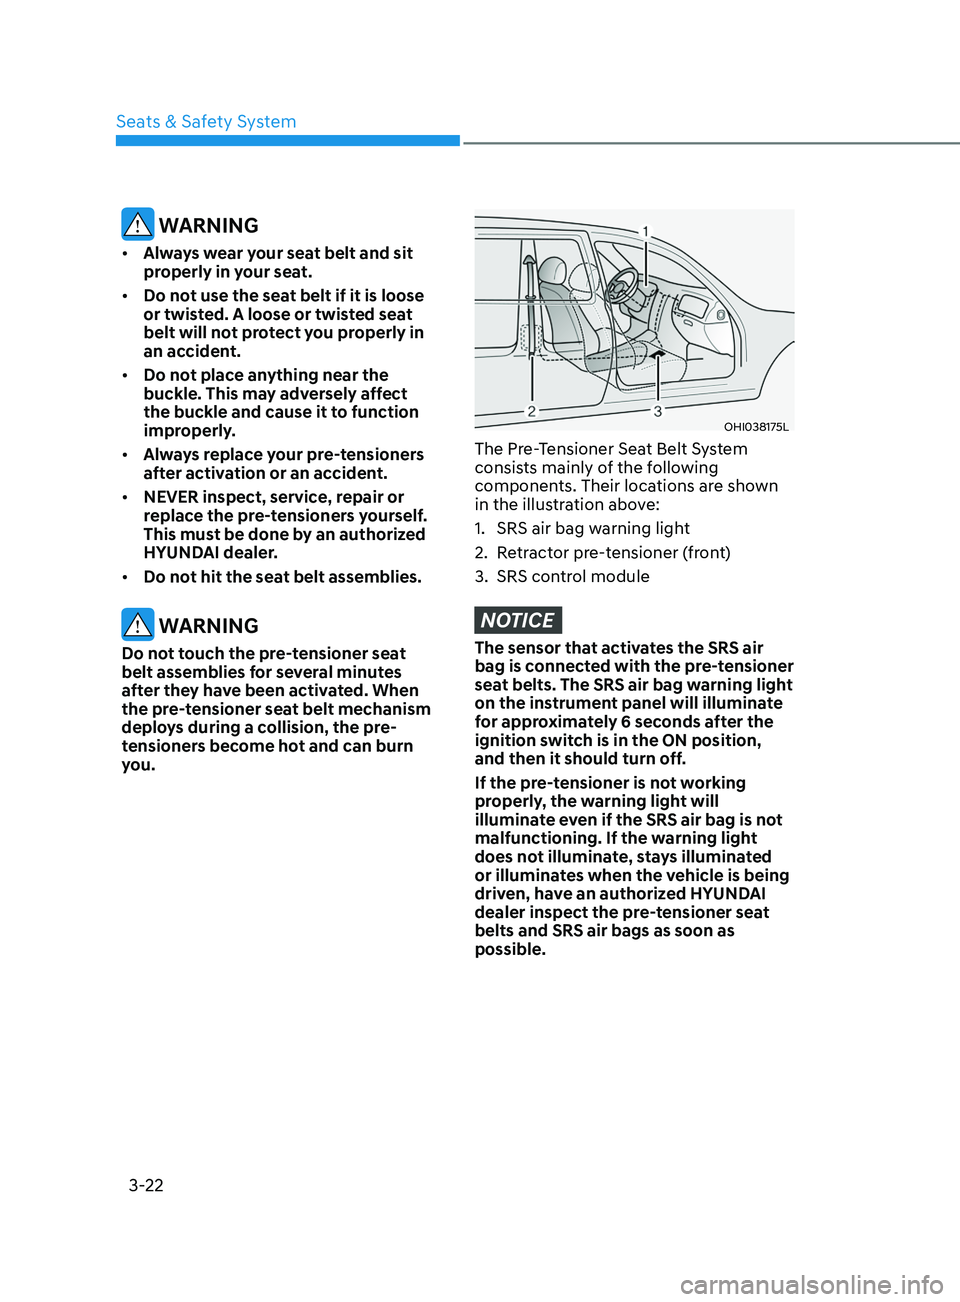 HYUNDAI ELANTRA SEL 2021  Owners Manual 3-22
 WARNING
•	Always wear your seat belt and sit 
properly in your seat.
•	 Do not use the seat belt if it is loose 
or twisted. A loose or twisted seat 
belt will not protect you properly in 
a